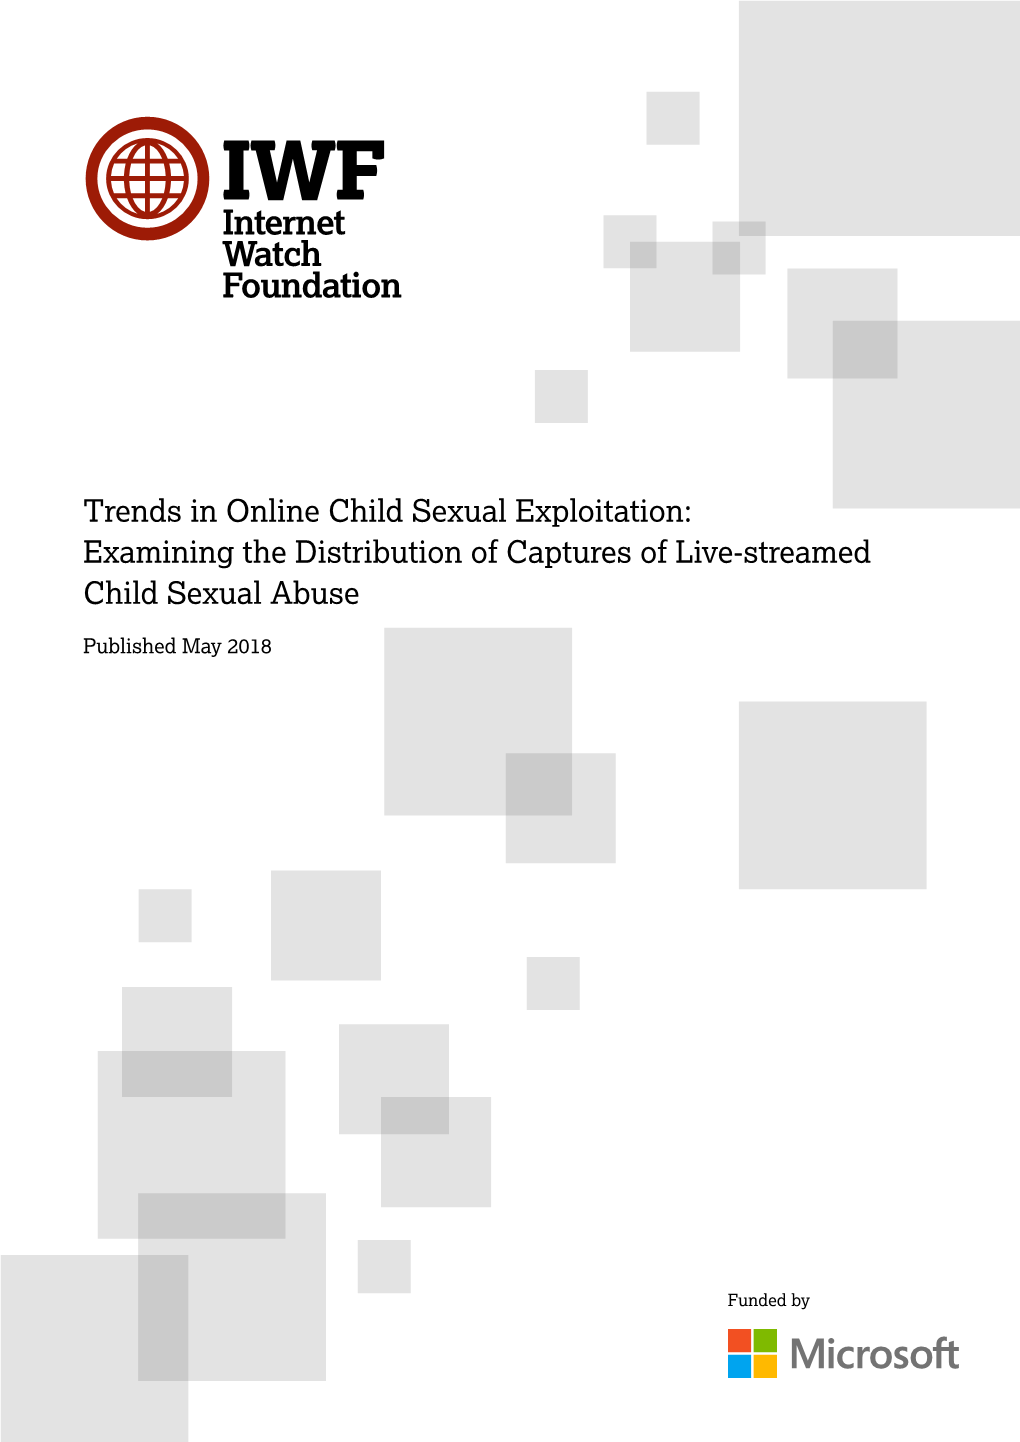 Trends in Online Child Sexual Exploitation: Examining the Distribution of Captures of Live-Streamed Child Sexual Abuse